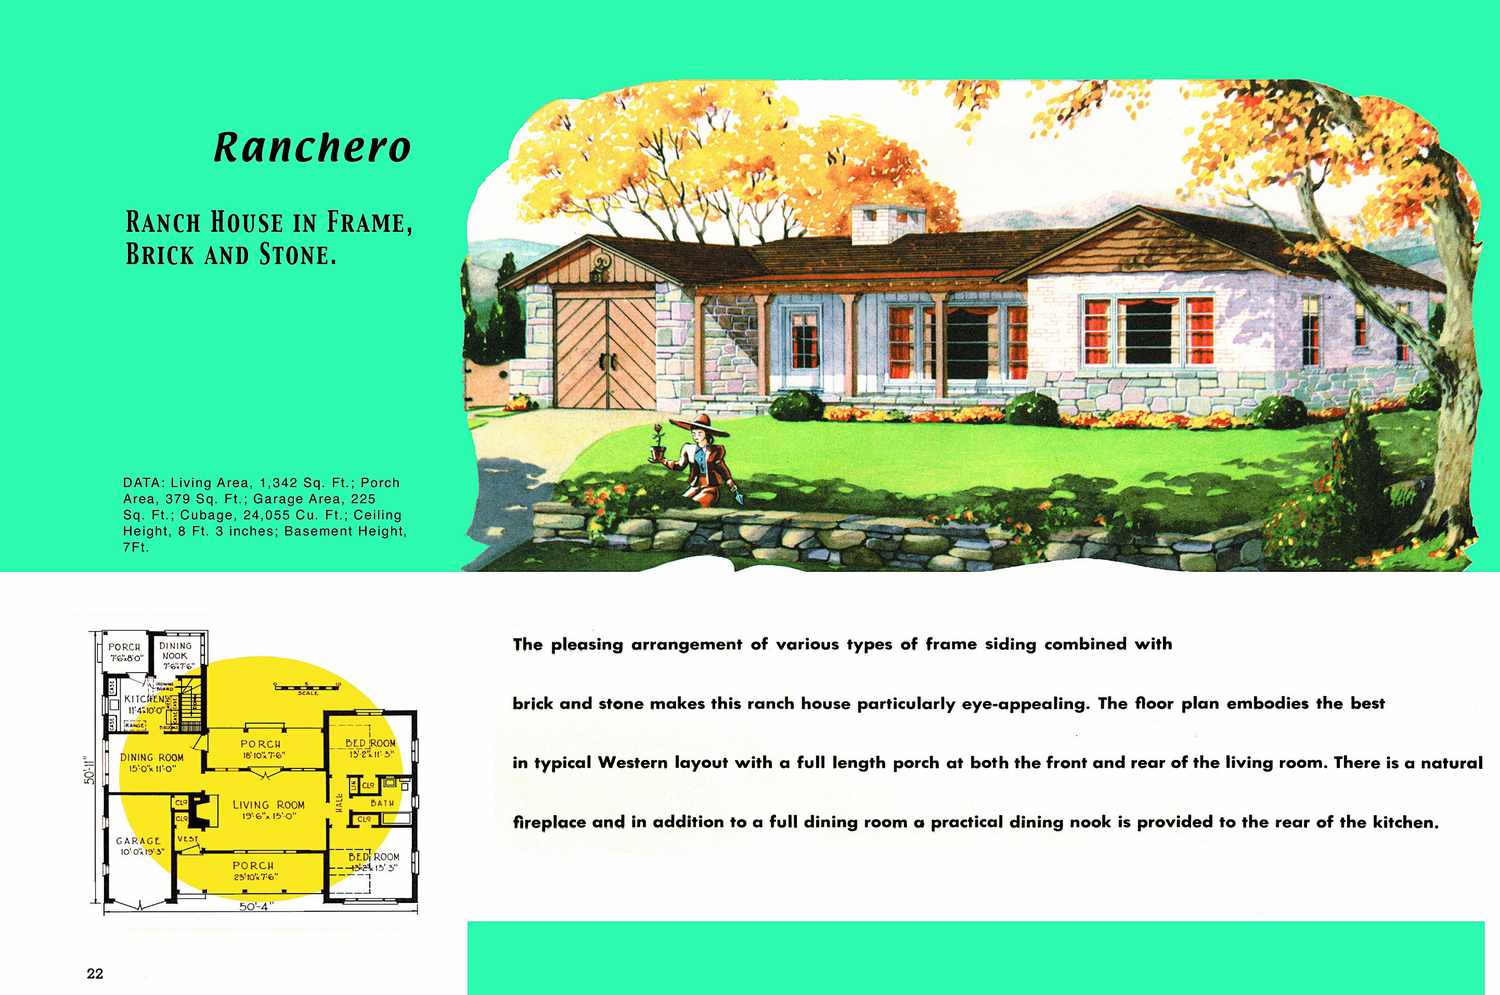 1950s floor plan and rendering of ranch-style house aptly named Ranchero